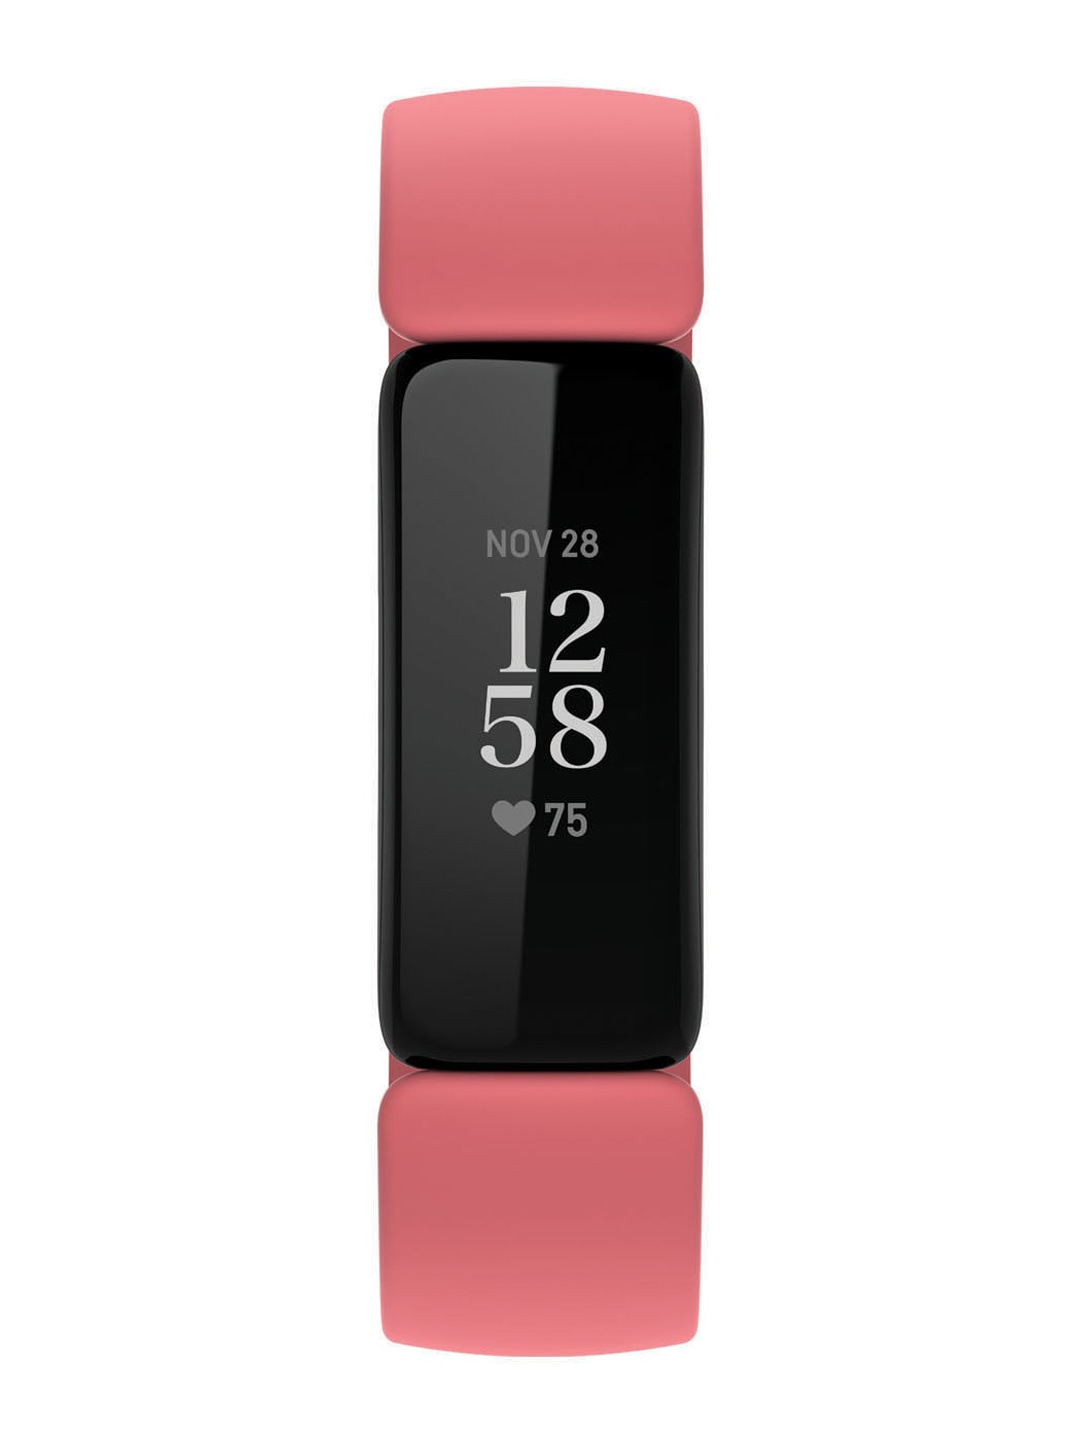 Accessories Fitness Bands | Fitbit Unisex Rose Pink & Black Inspire 2 Fitness Band - PD15904